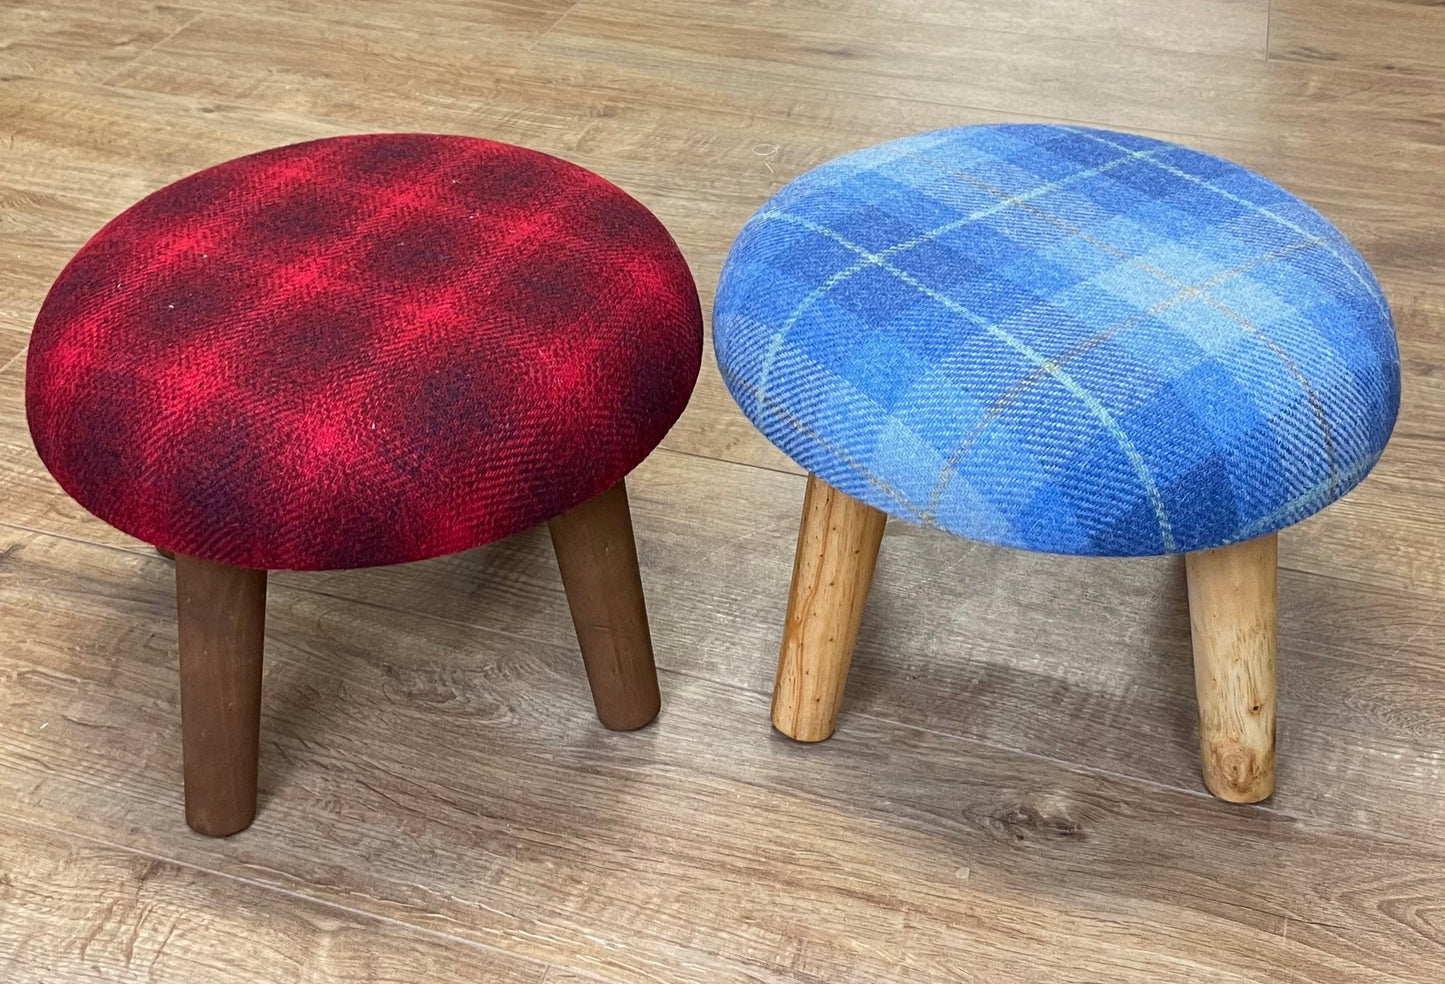 Red Harris Tweed Mini Button Footstool with Rustic Wooden Legs